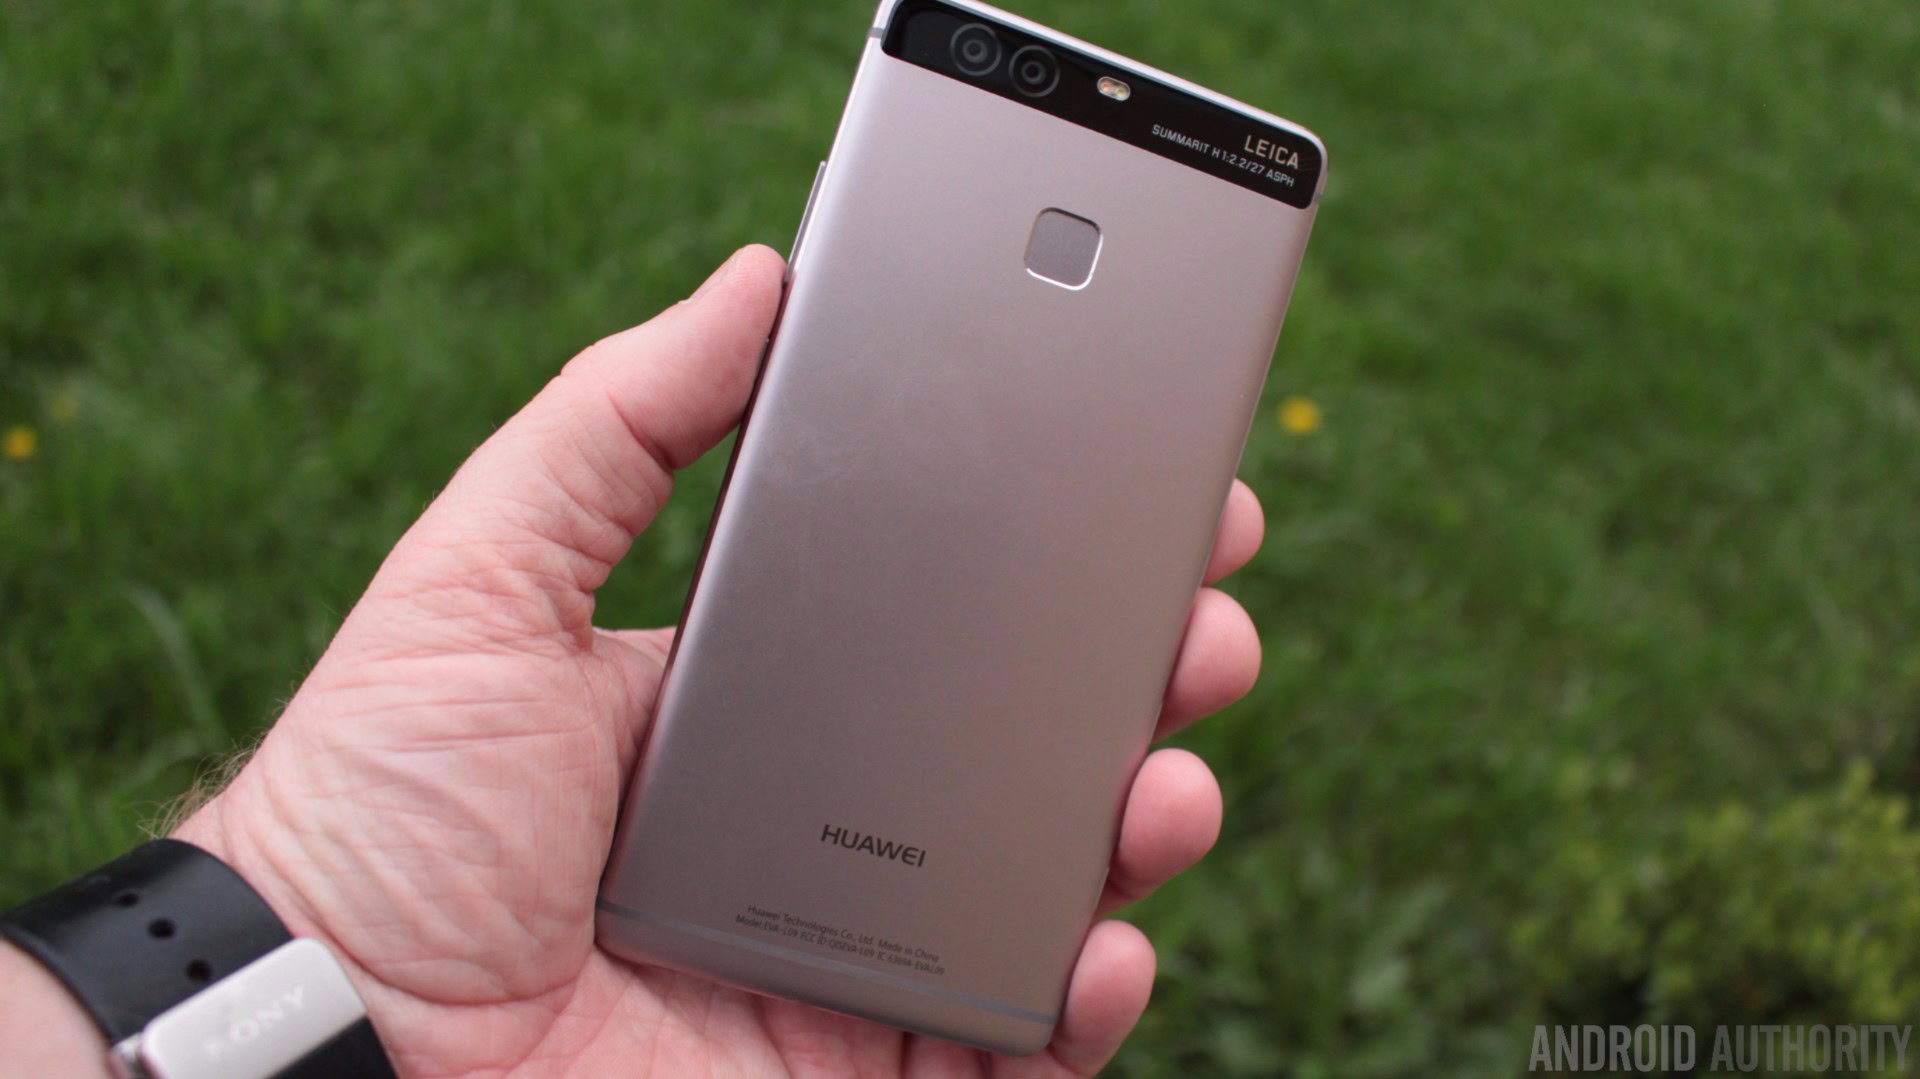 bunker browser Pigment Huawei P9 review - Android Authority